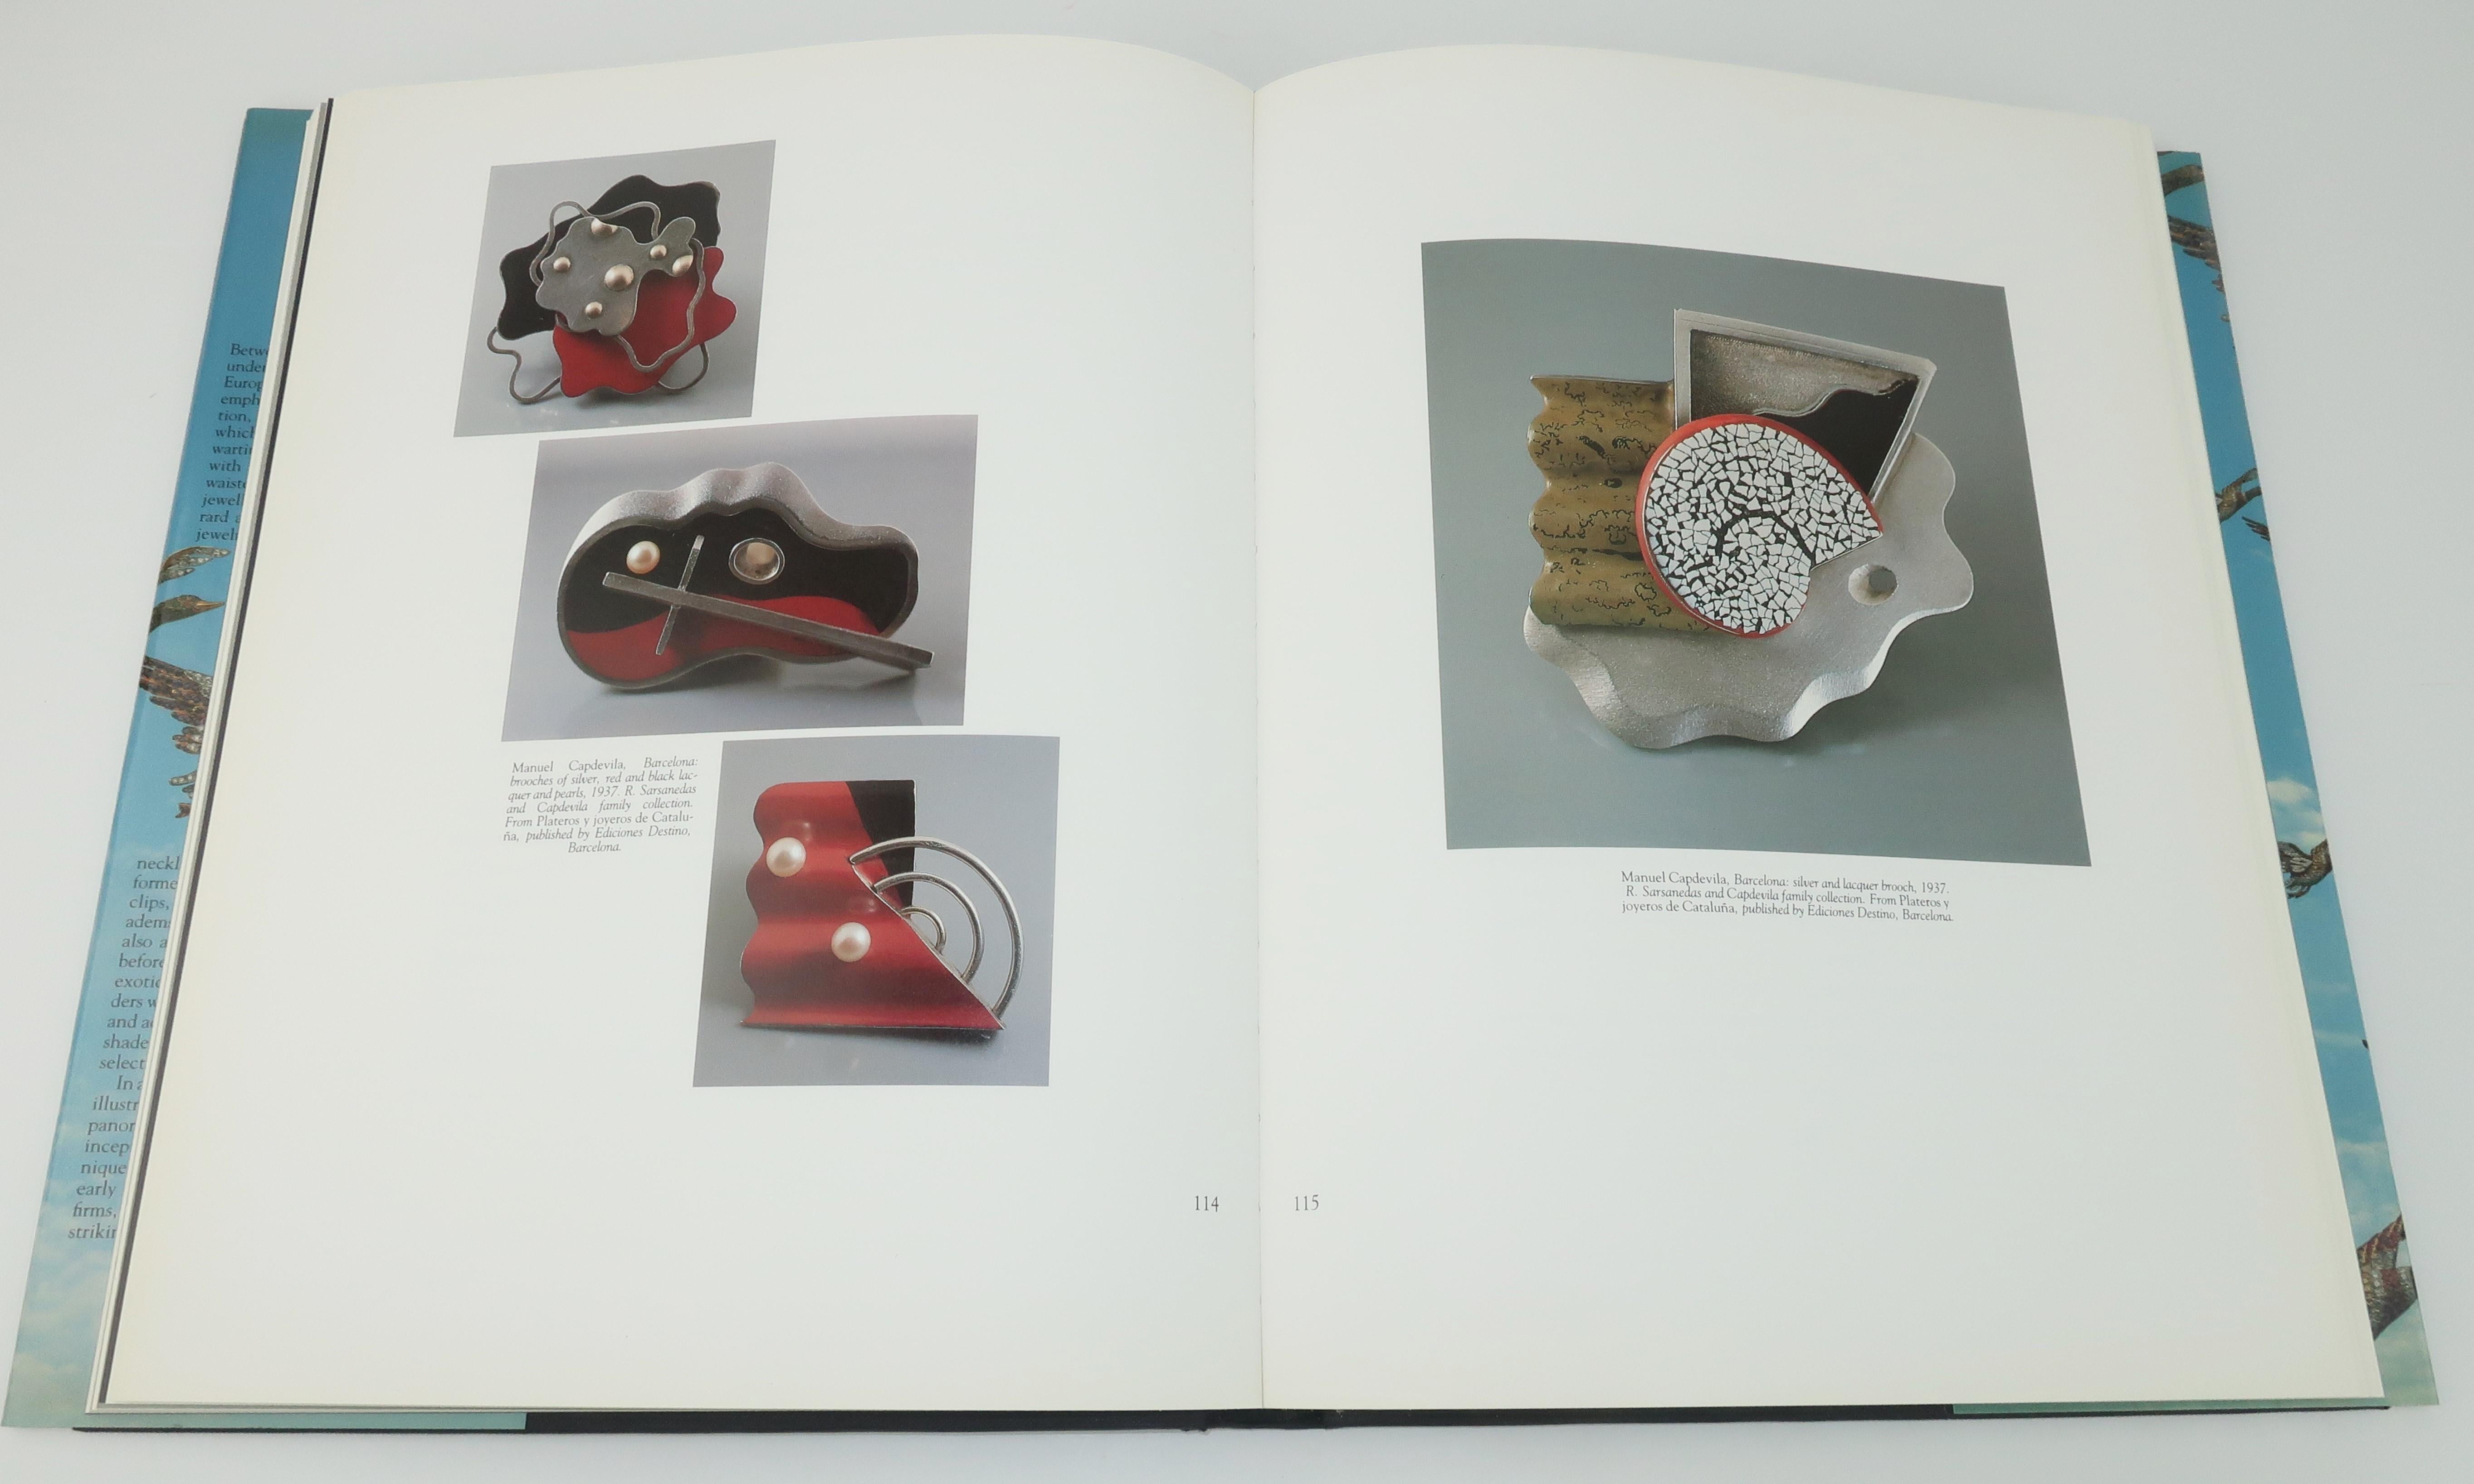 'Jewelry of the 1940s and 1950s' by Sylvie Raulet Collector's Coffee Table Book 1